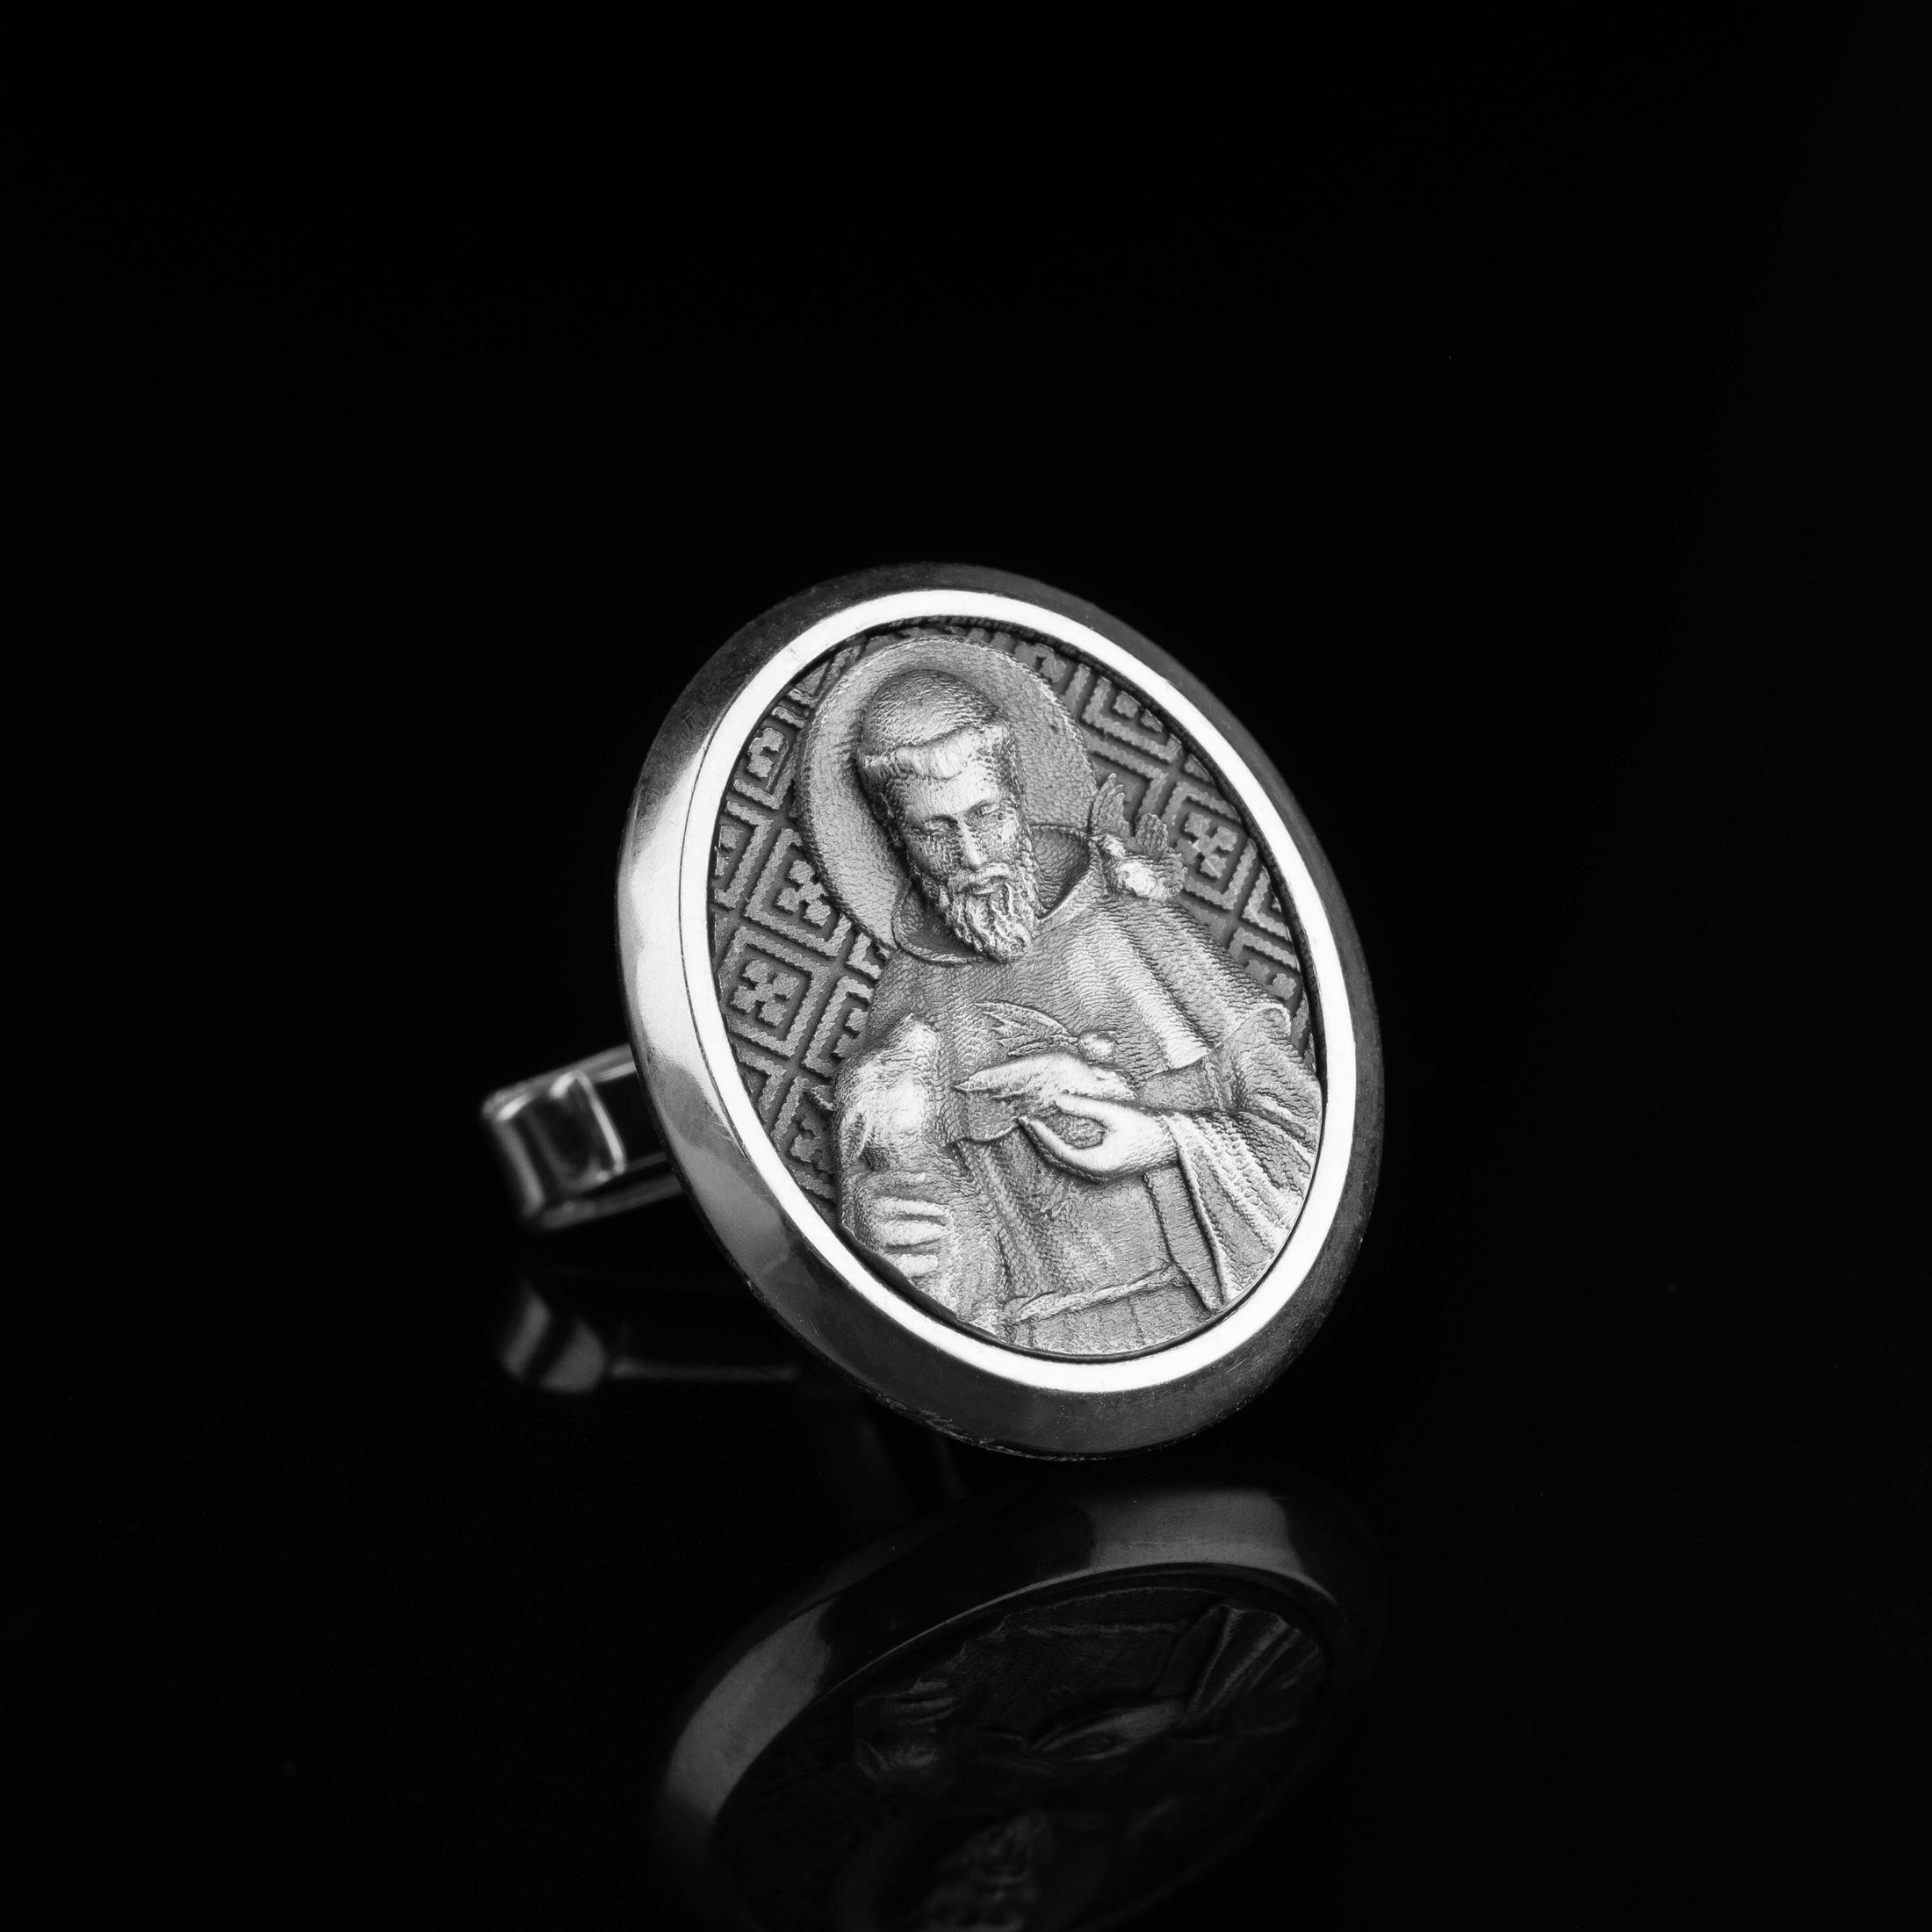 Saint Francis, Silver Cuff Link, Christian Cufflinks, Groomsman, Christian Jewelry, Gift For Christians, Religious Gift, Engraved Cufflinks Polished Frame